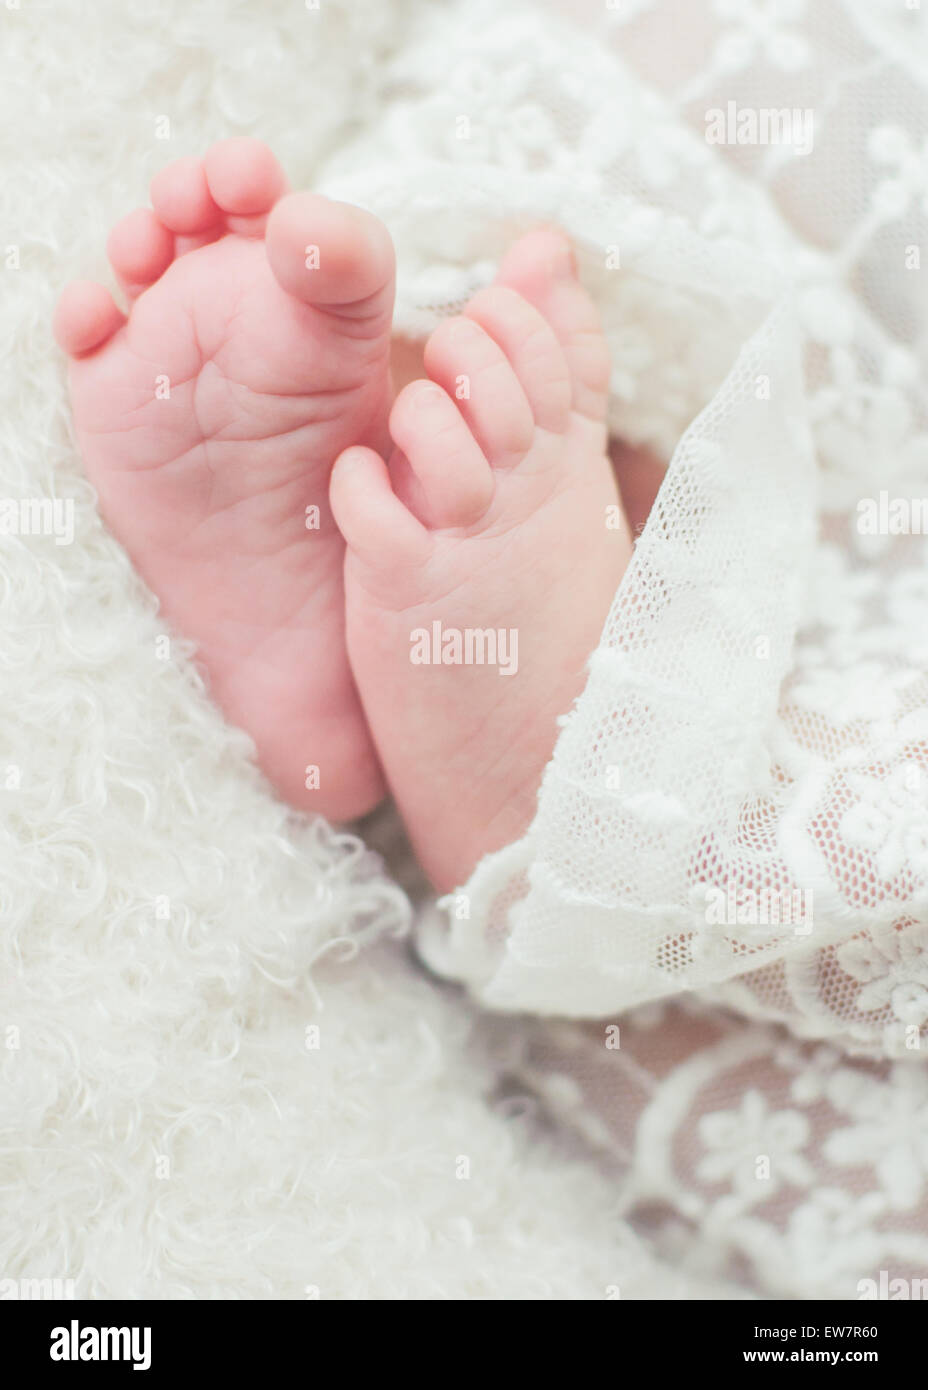 Baby's foot, low section (3-6 months), close-up stock photo